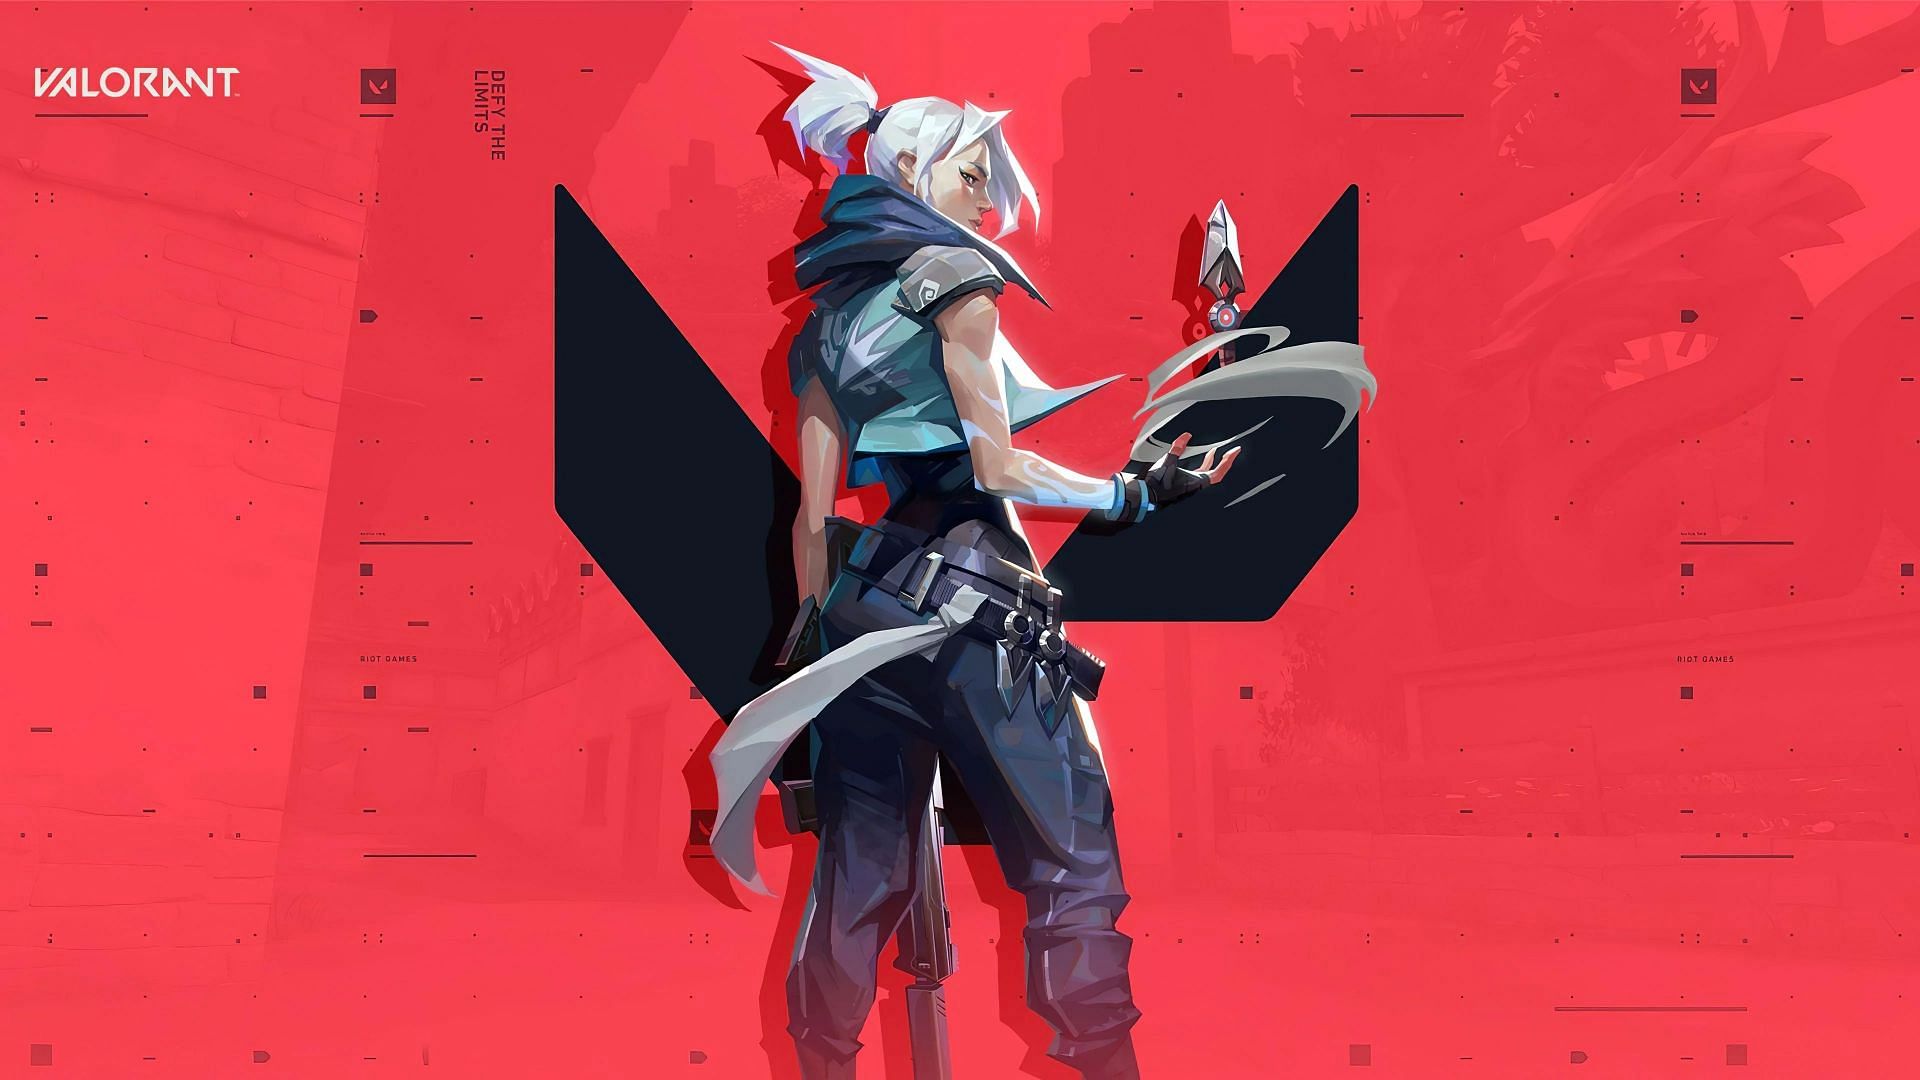 Jett is a duelist in Valorant (Image via Riot Games)